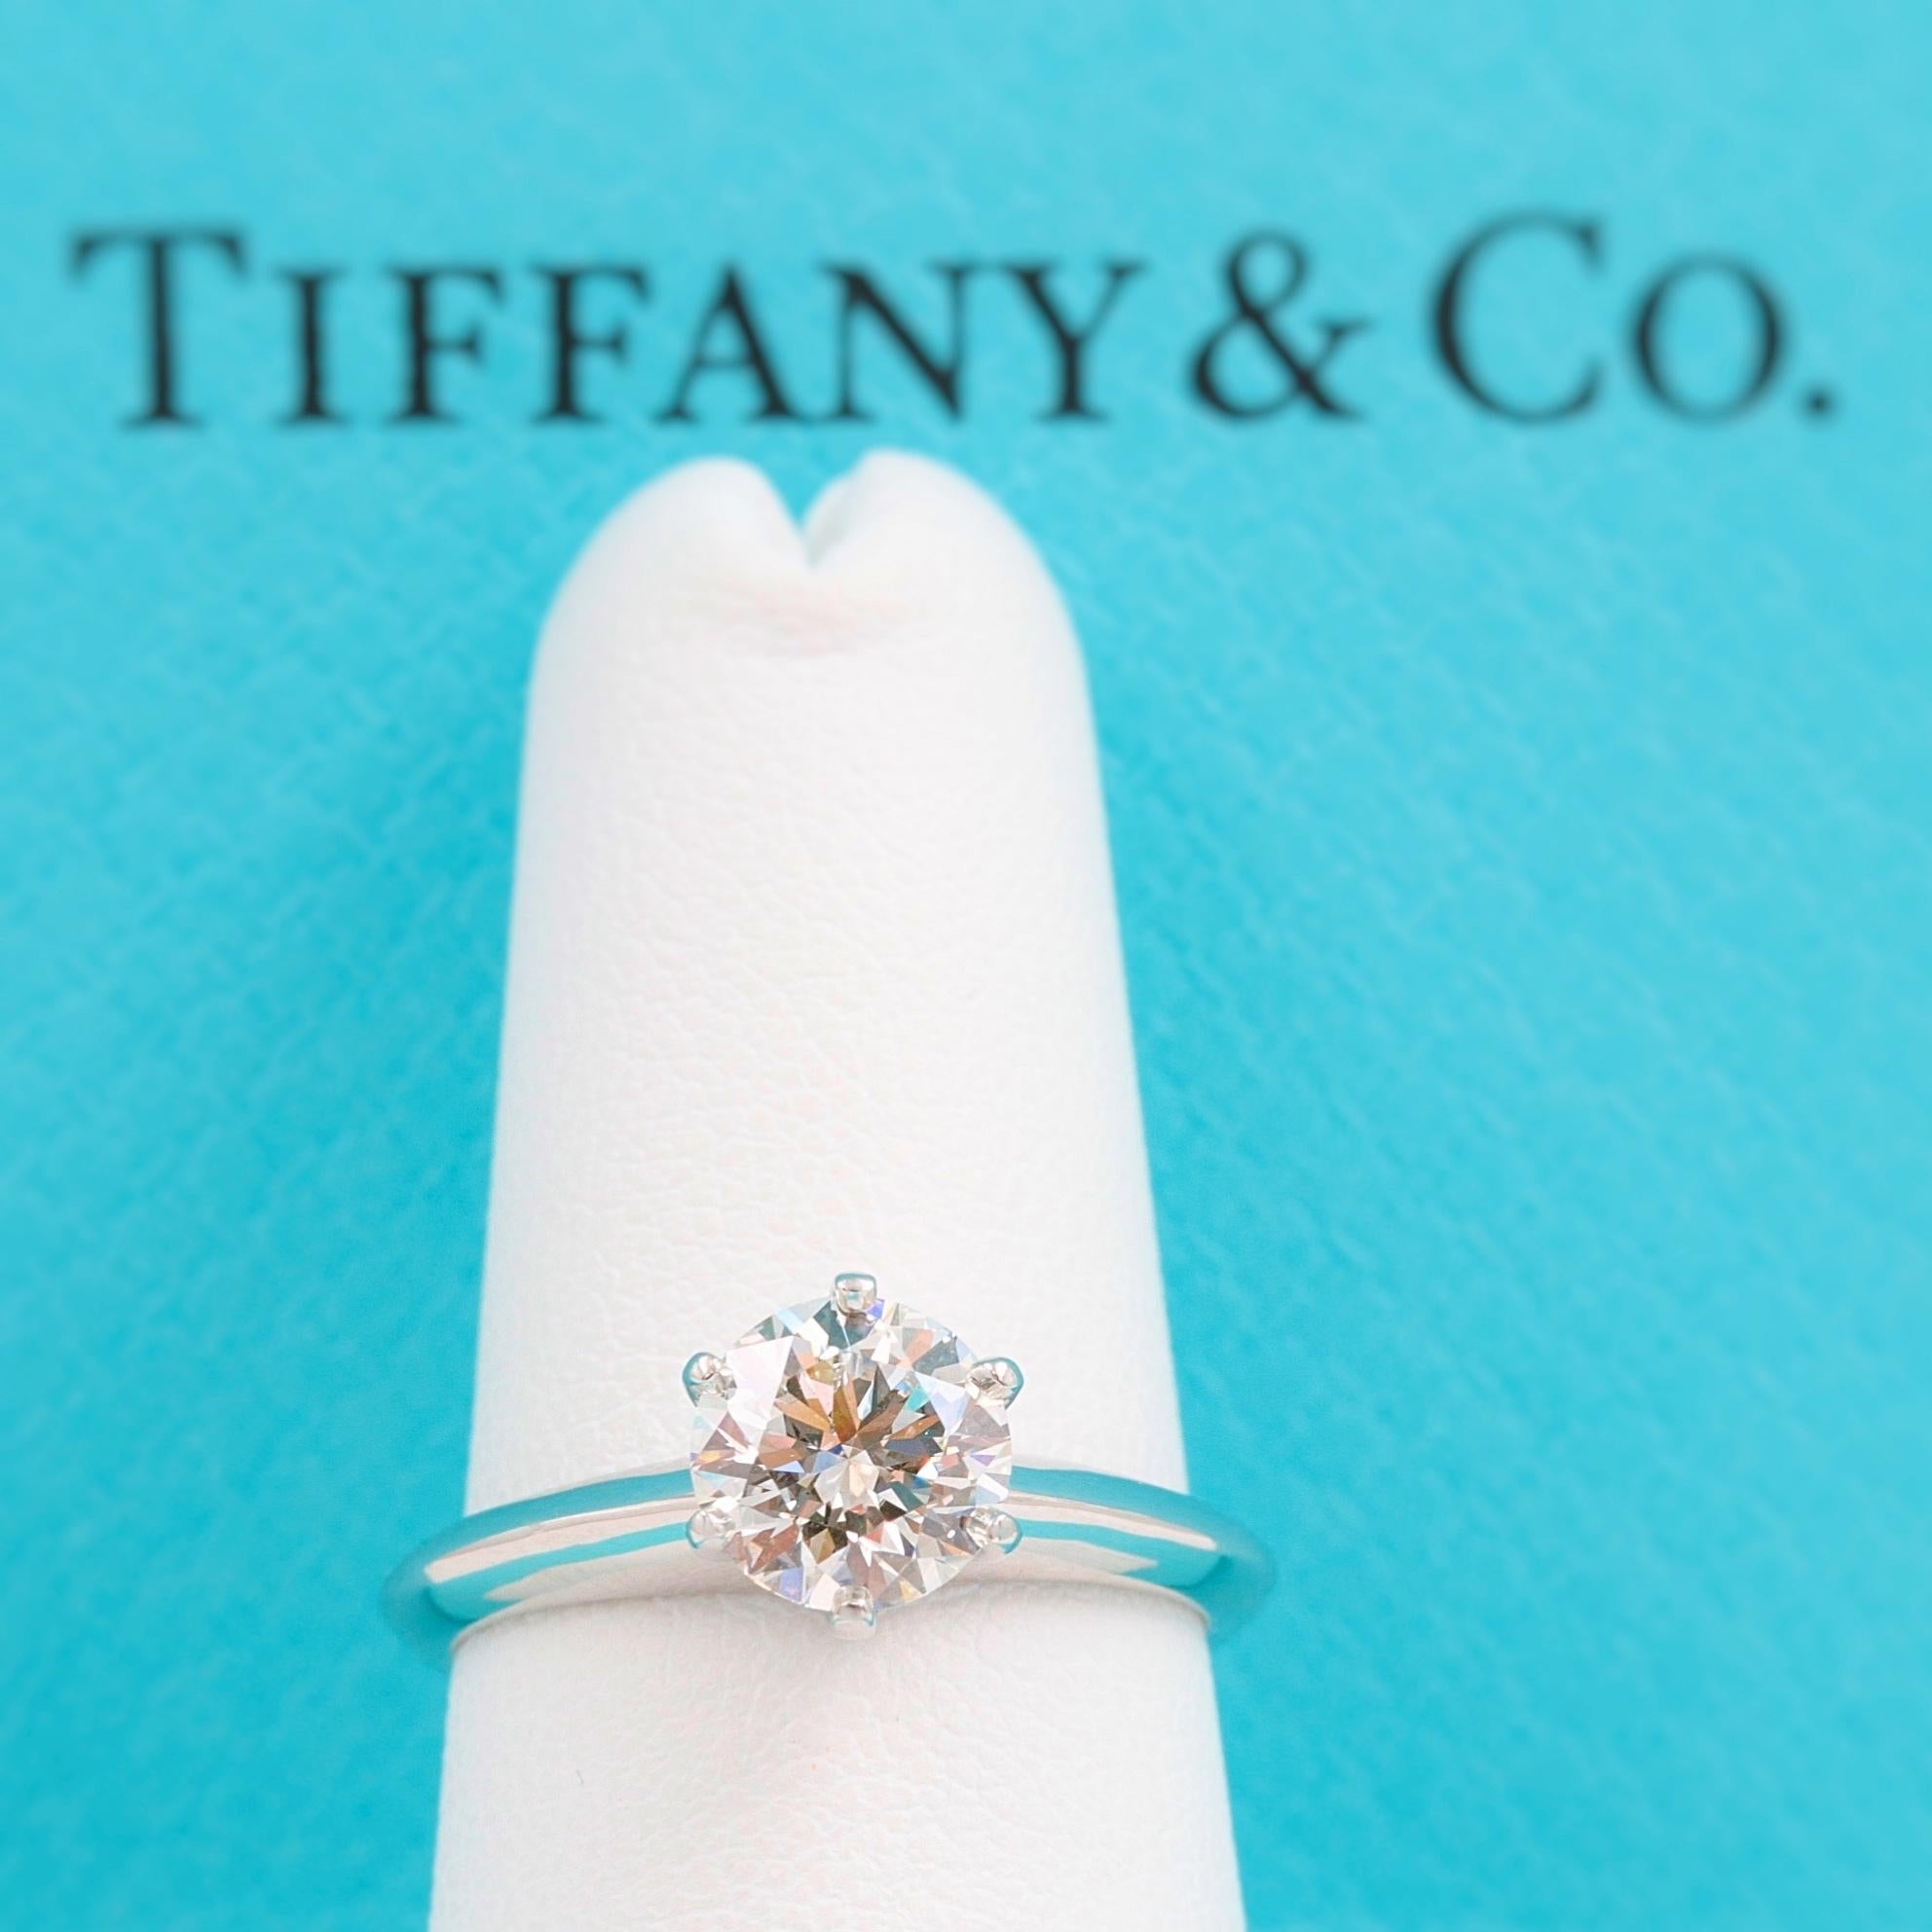 Tiffany & Co  Engagement Ring

Style:  TIFFANY Setting 
Metal:  Platinum PT950
Size:  6 - sizble
Total Carat Weight:  1.00 cts
Diamond Shape:  Round Brilliant 
Diamond Color & Clarity:  I - VS1
Hallmark:  ©TIFFANY&CO. PT950 25612612 1.00CT
Includes: